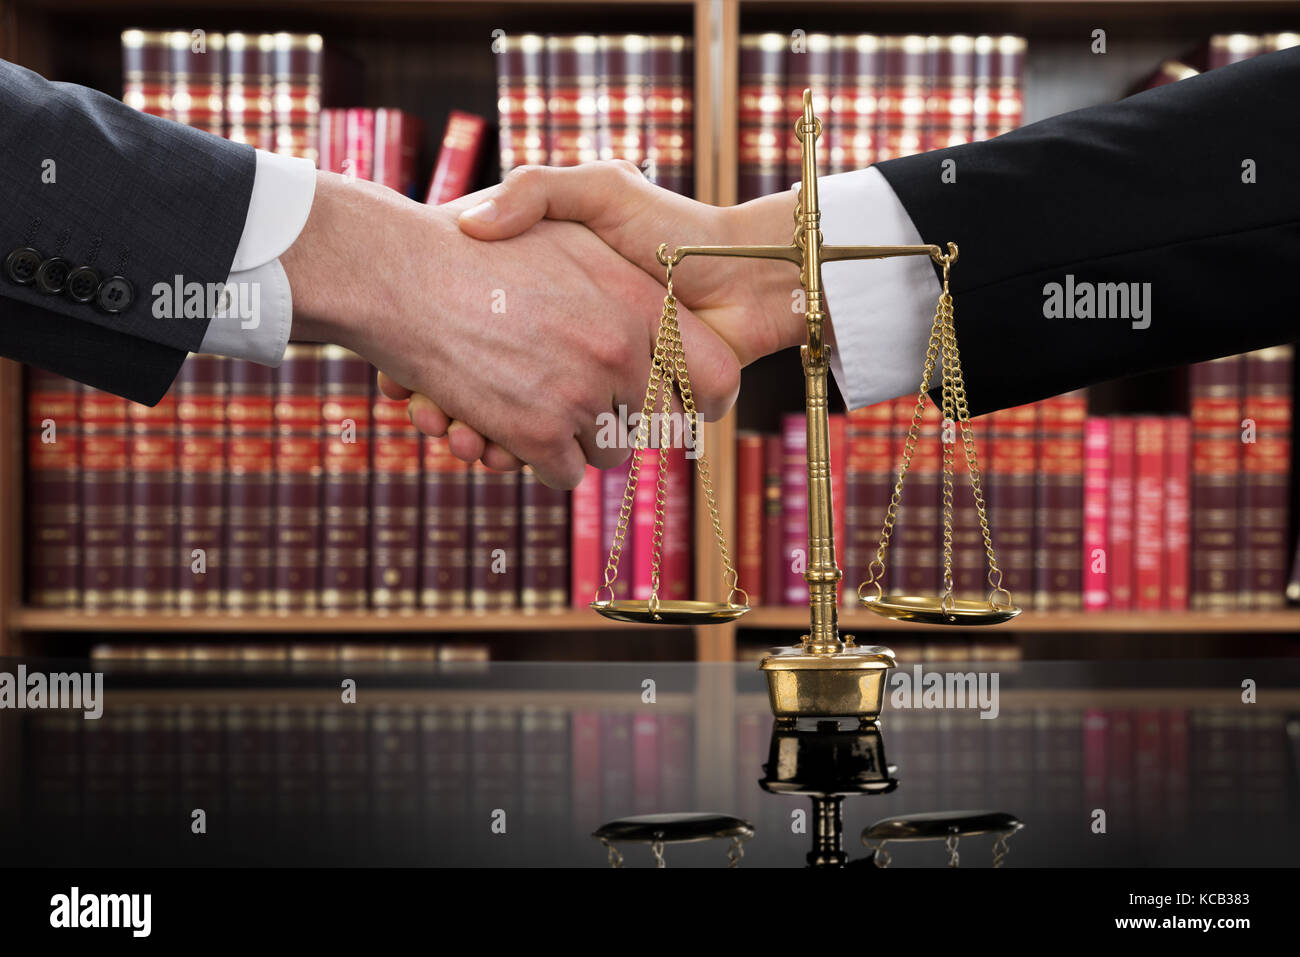 Close-up Of A Justice Scale With Judge And Client Shaking Hands In A Courtroom Stock Photo